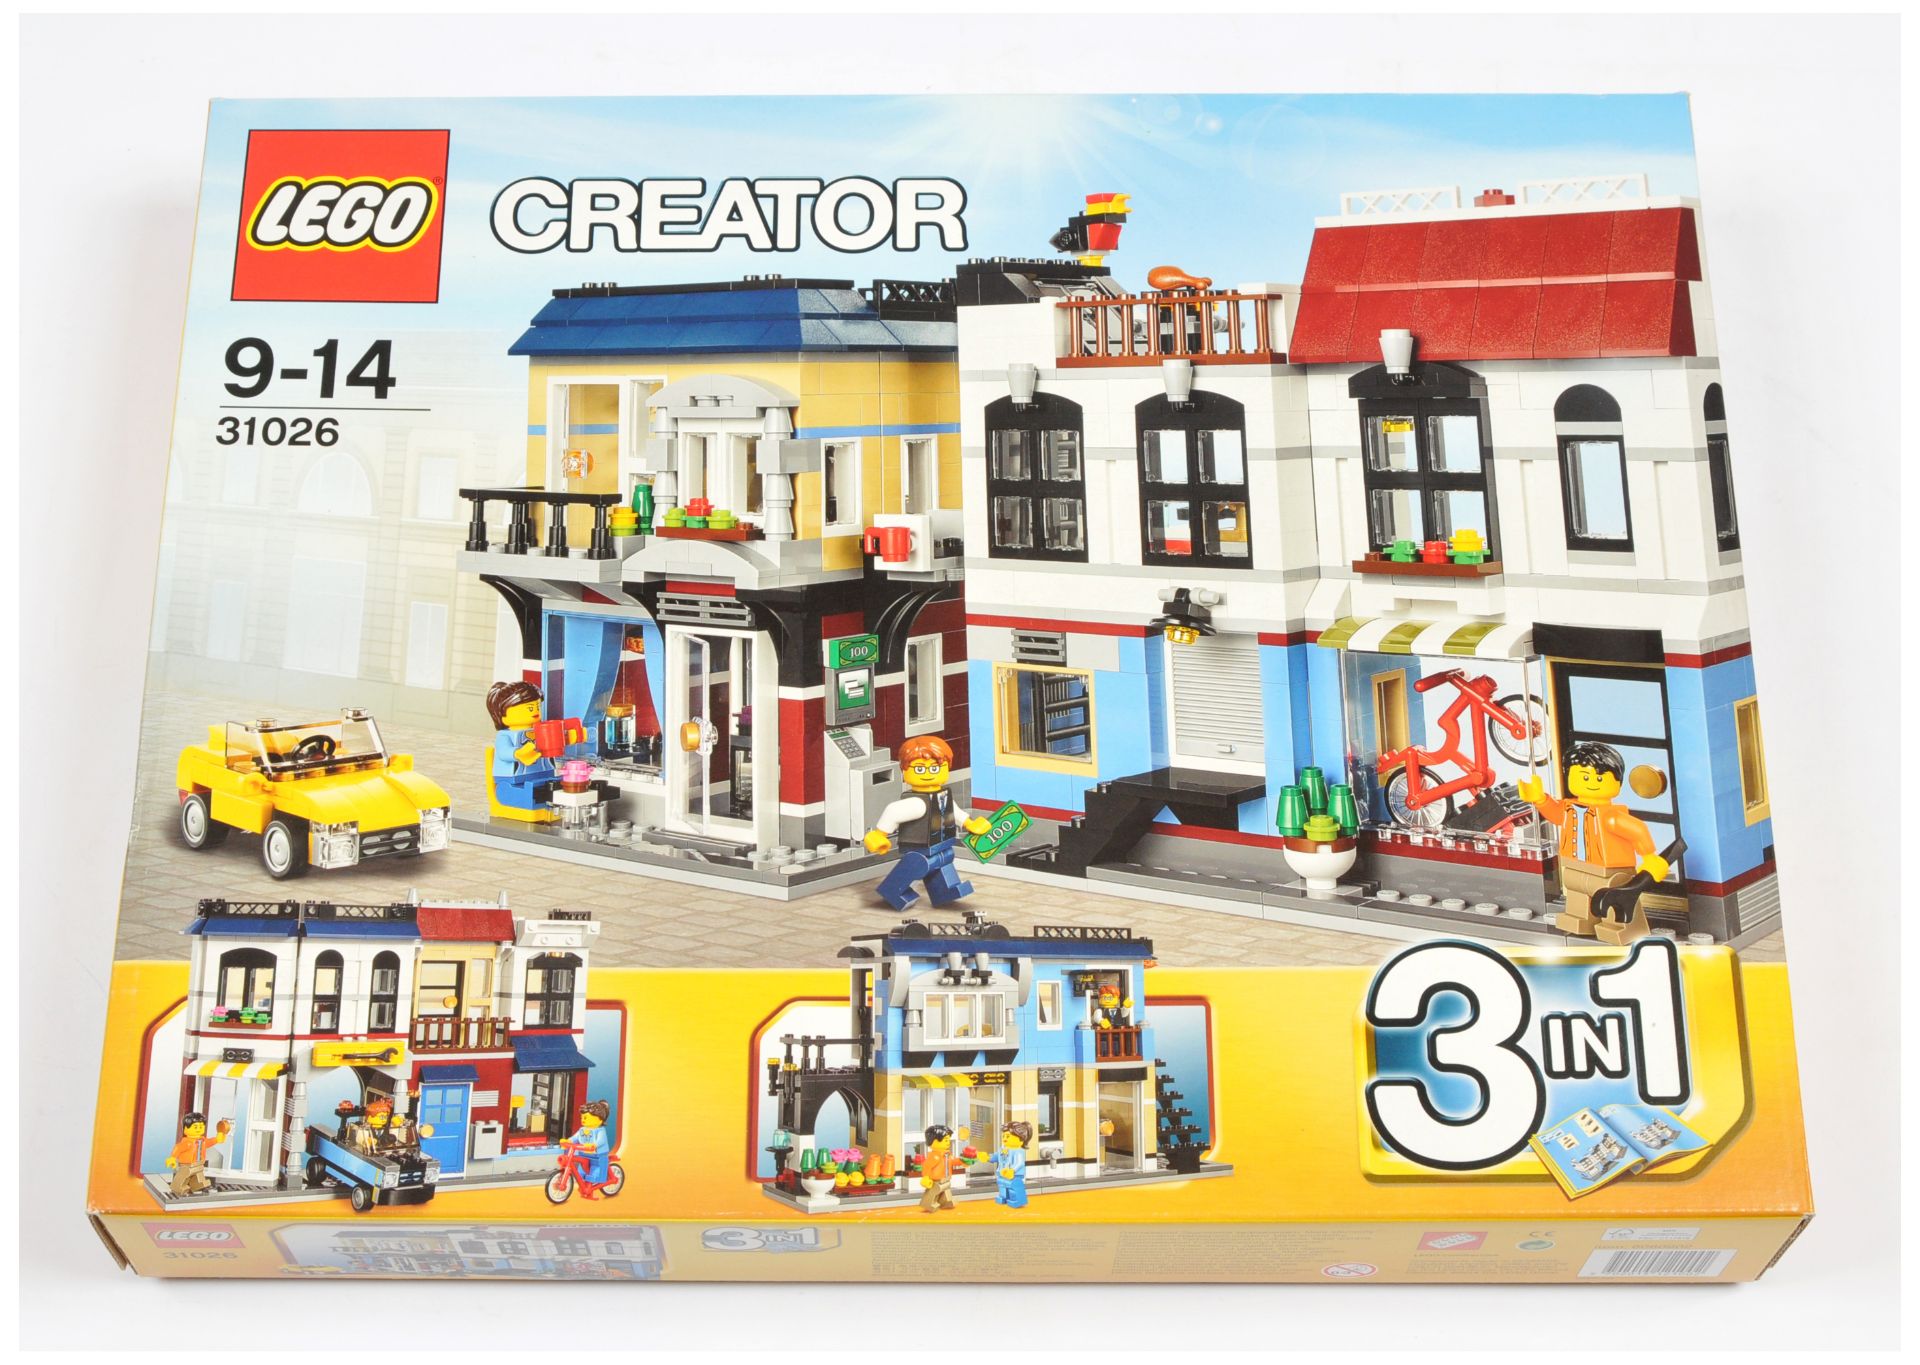 Lego Creator 31026  3 in 1 - Bike Shop & Cafe - Modular Buildings Series within Near Mint Sealed ...